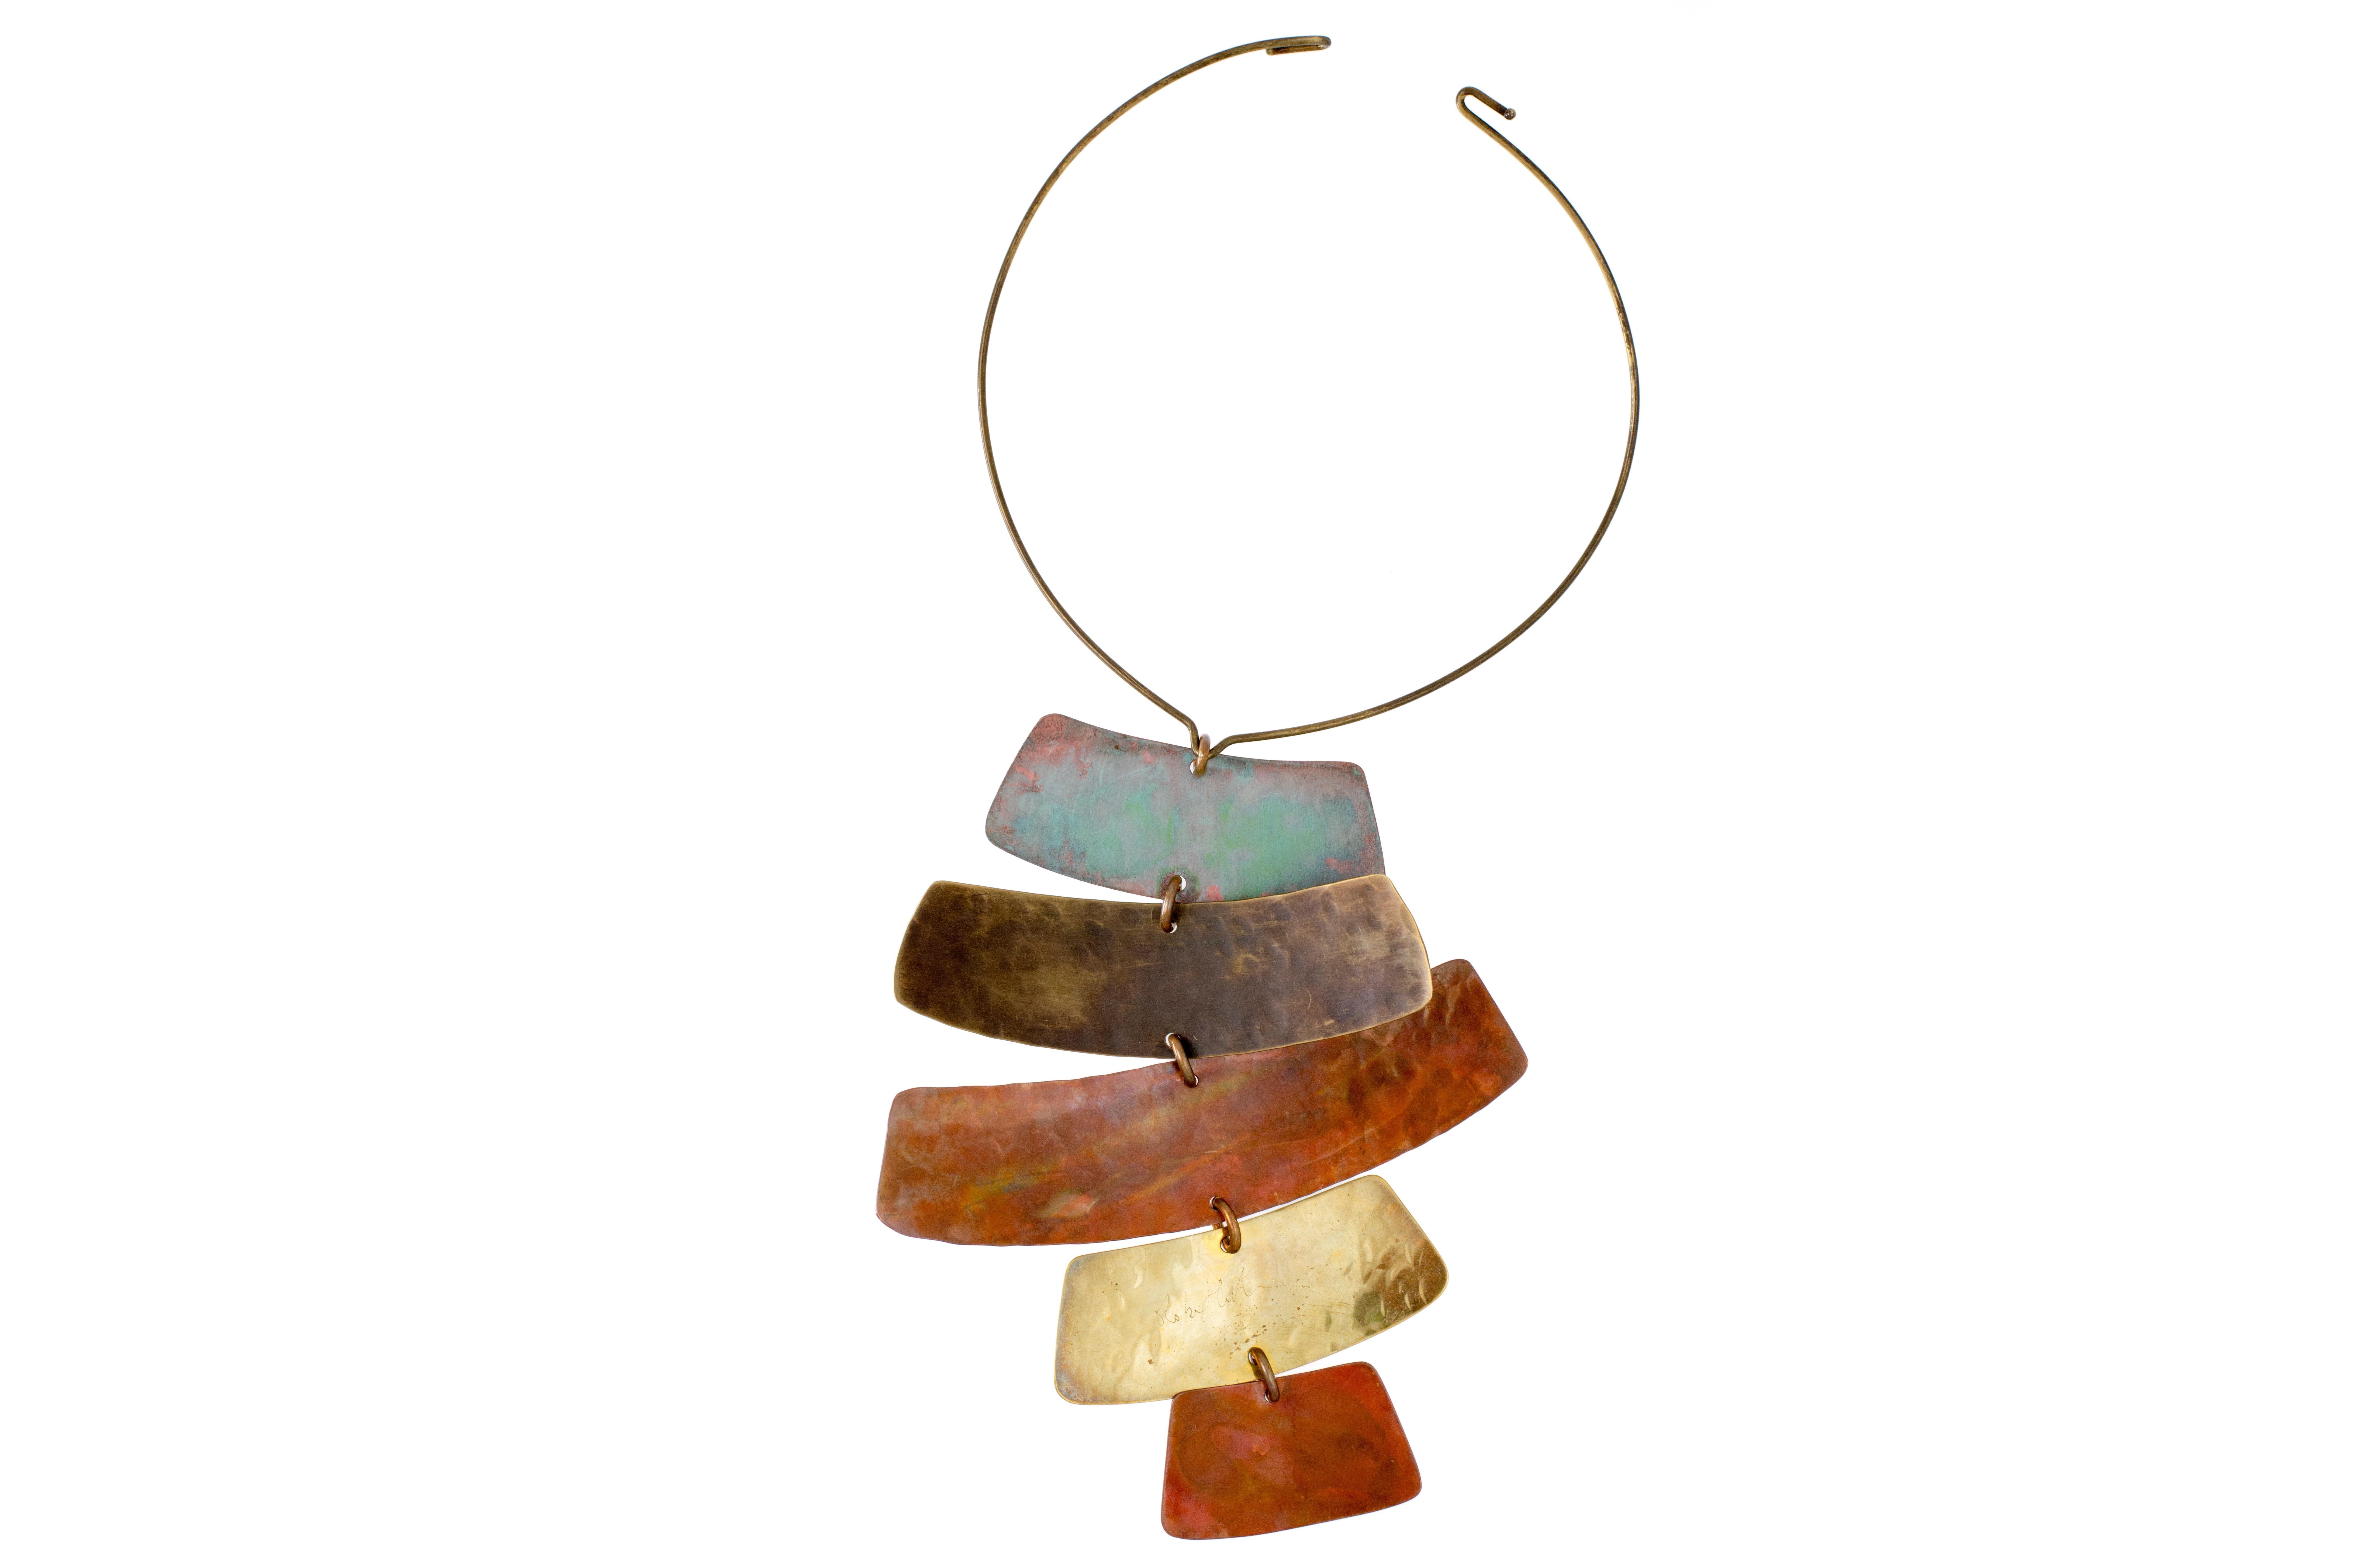 A patinated copper and brass totem necklace, by Robert Lee Morris , c. 1990s.
This necklace comes from his Mandala Collection, which was inspired by ancient jewelry and decorative objects. 
The pendant is 7